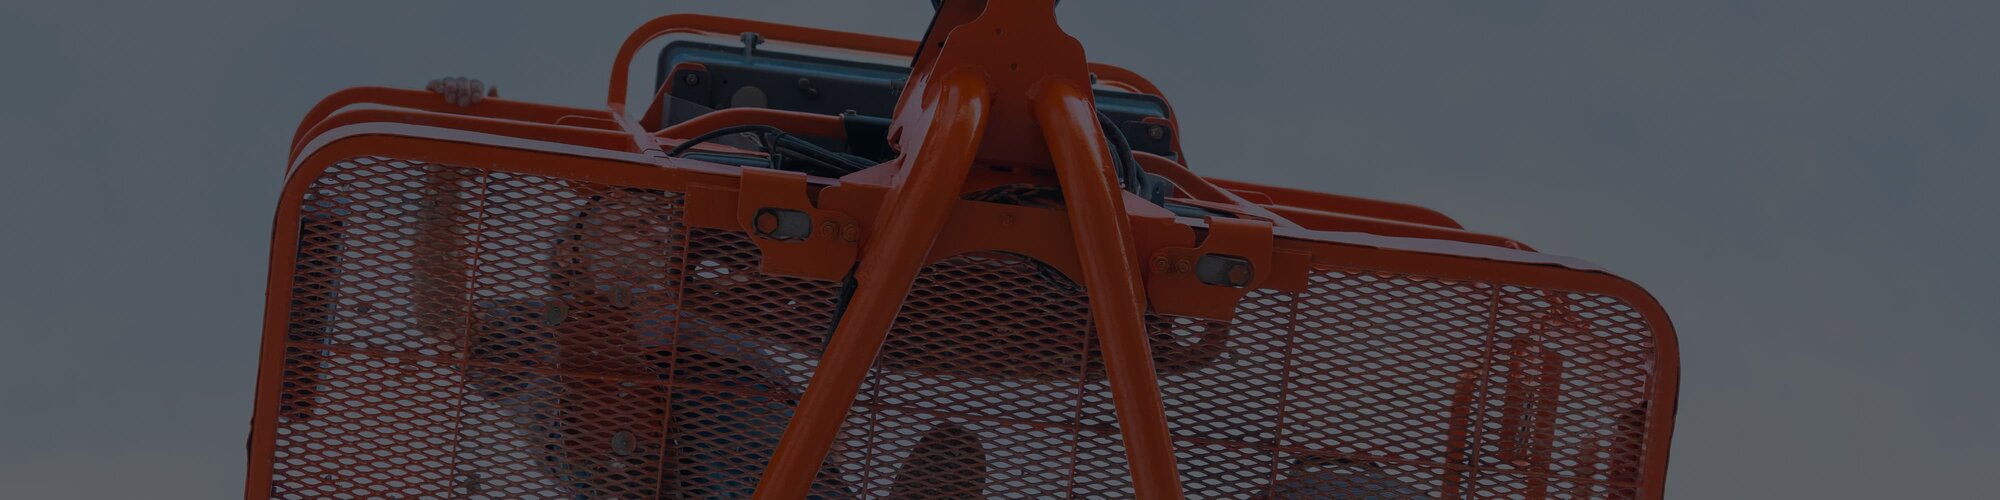 A look up at the platform of a boom lift with a worker standing in it